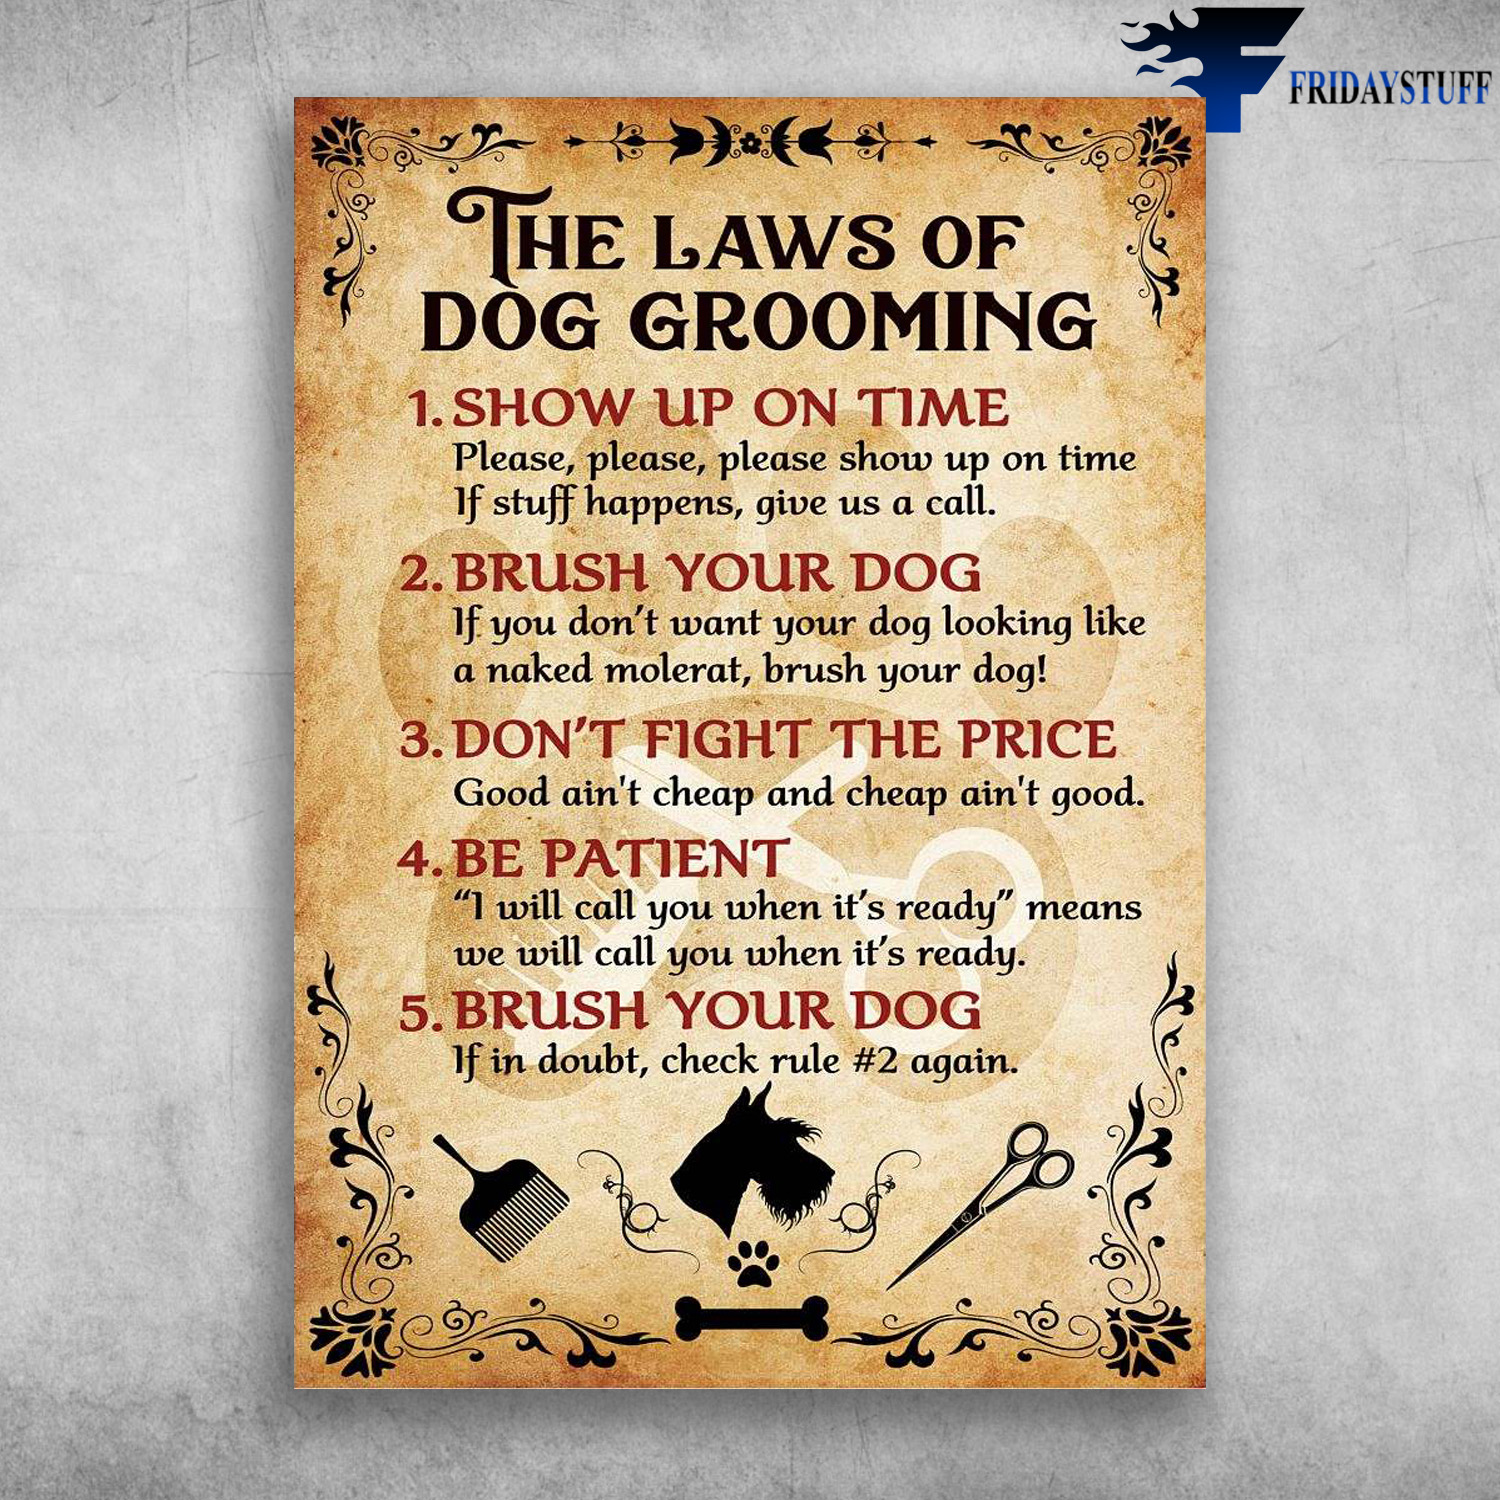 Dog Groomer Laws - The Laws Of Dog Grooming, Show Up On Time, Brush Your Dog, Don't Fight The Price, Be Patient, Brush Your Dog